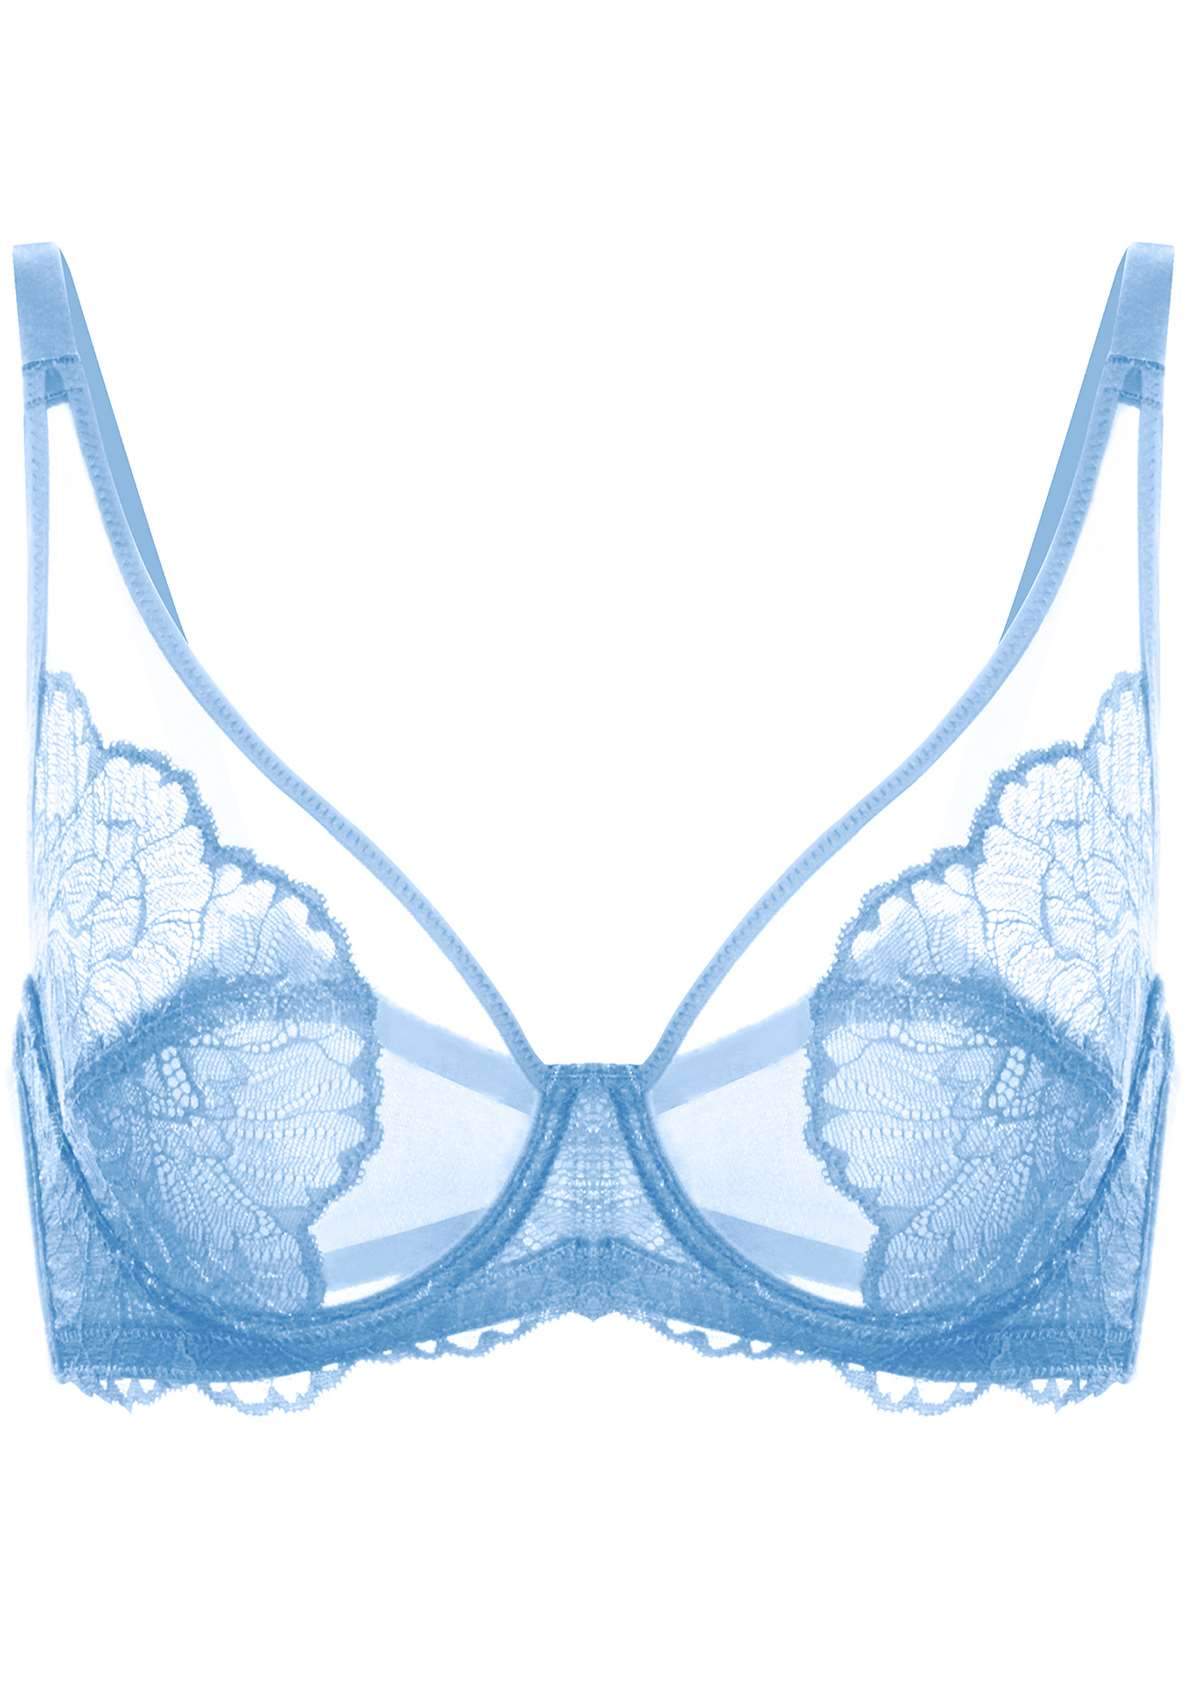 HSIA Blossom Full Coverage Supportive Unlined Underwire Bra Set - Storm Blue / 40 / C